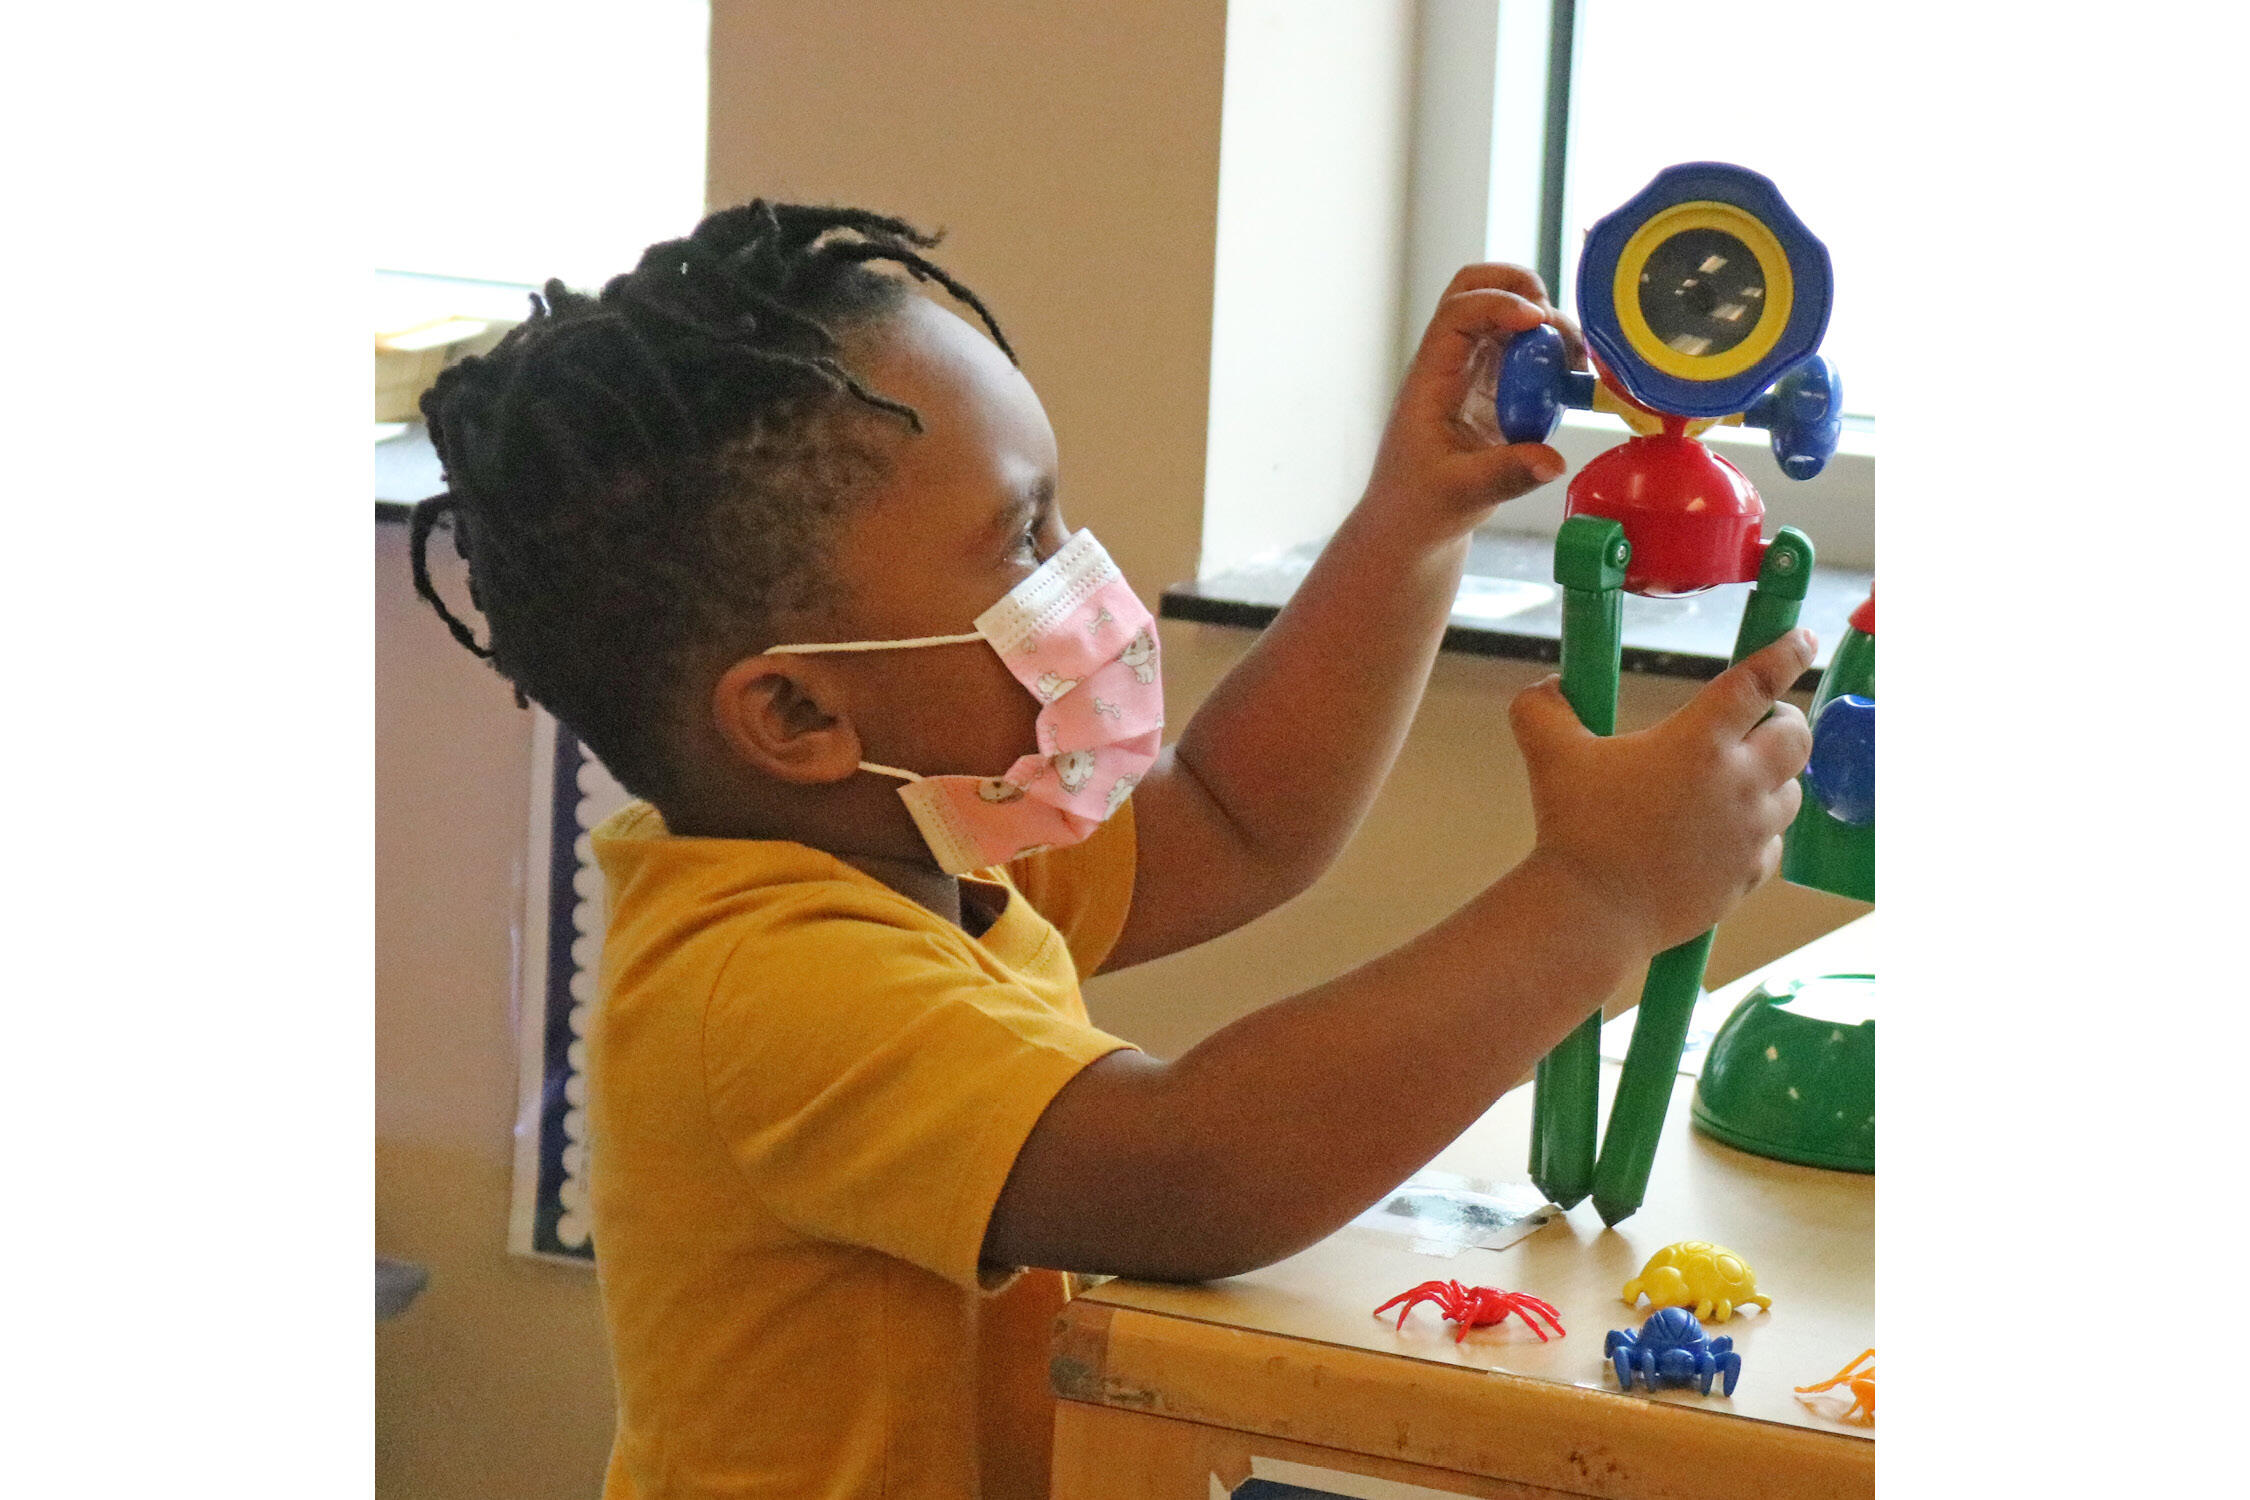 Pre-K student playing with a plastic science toy